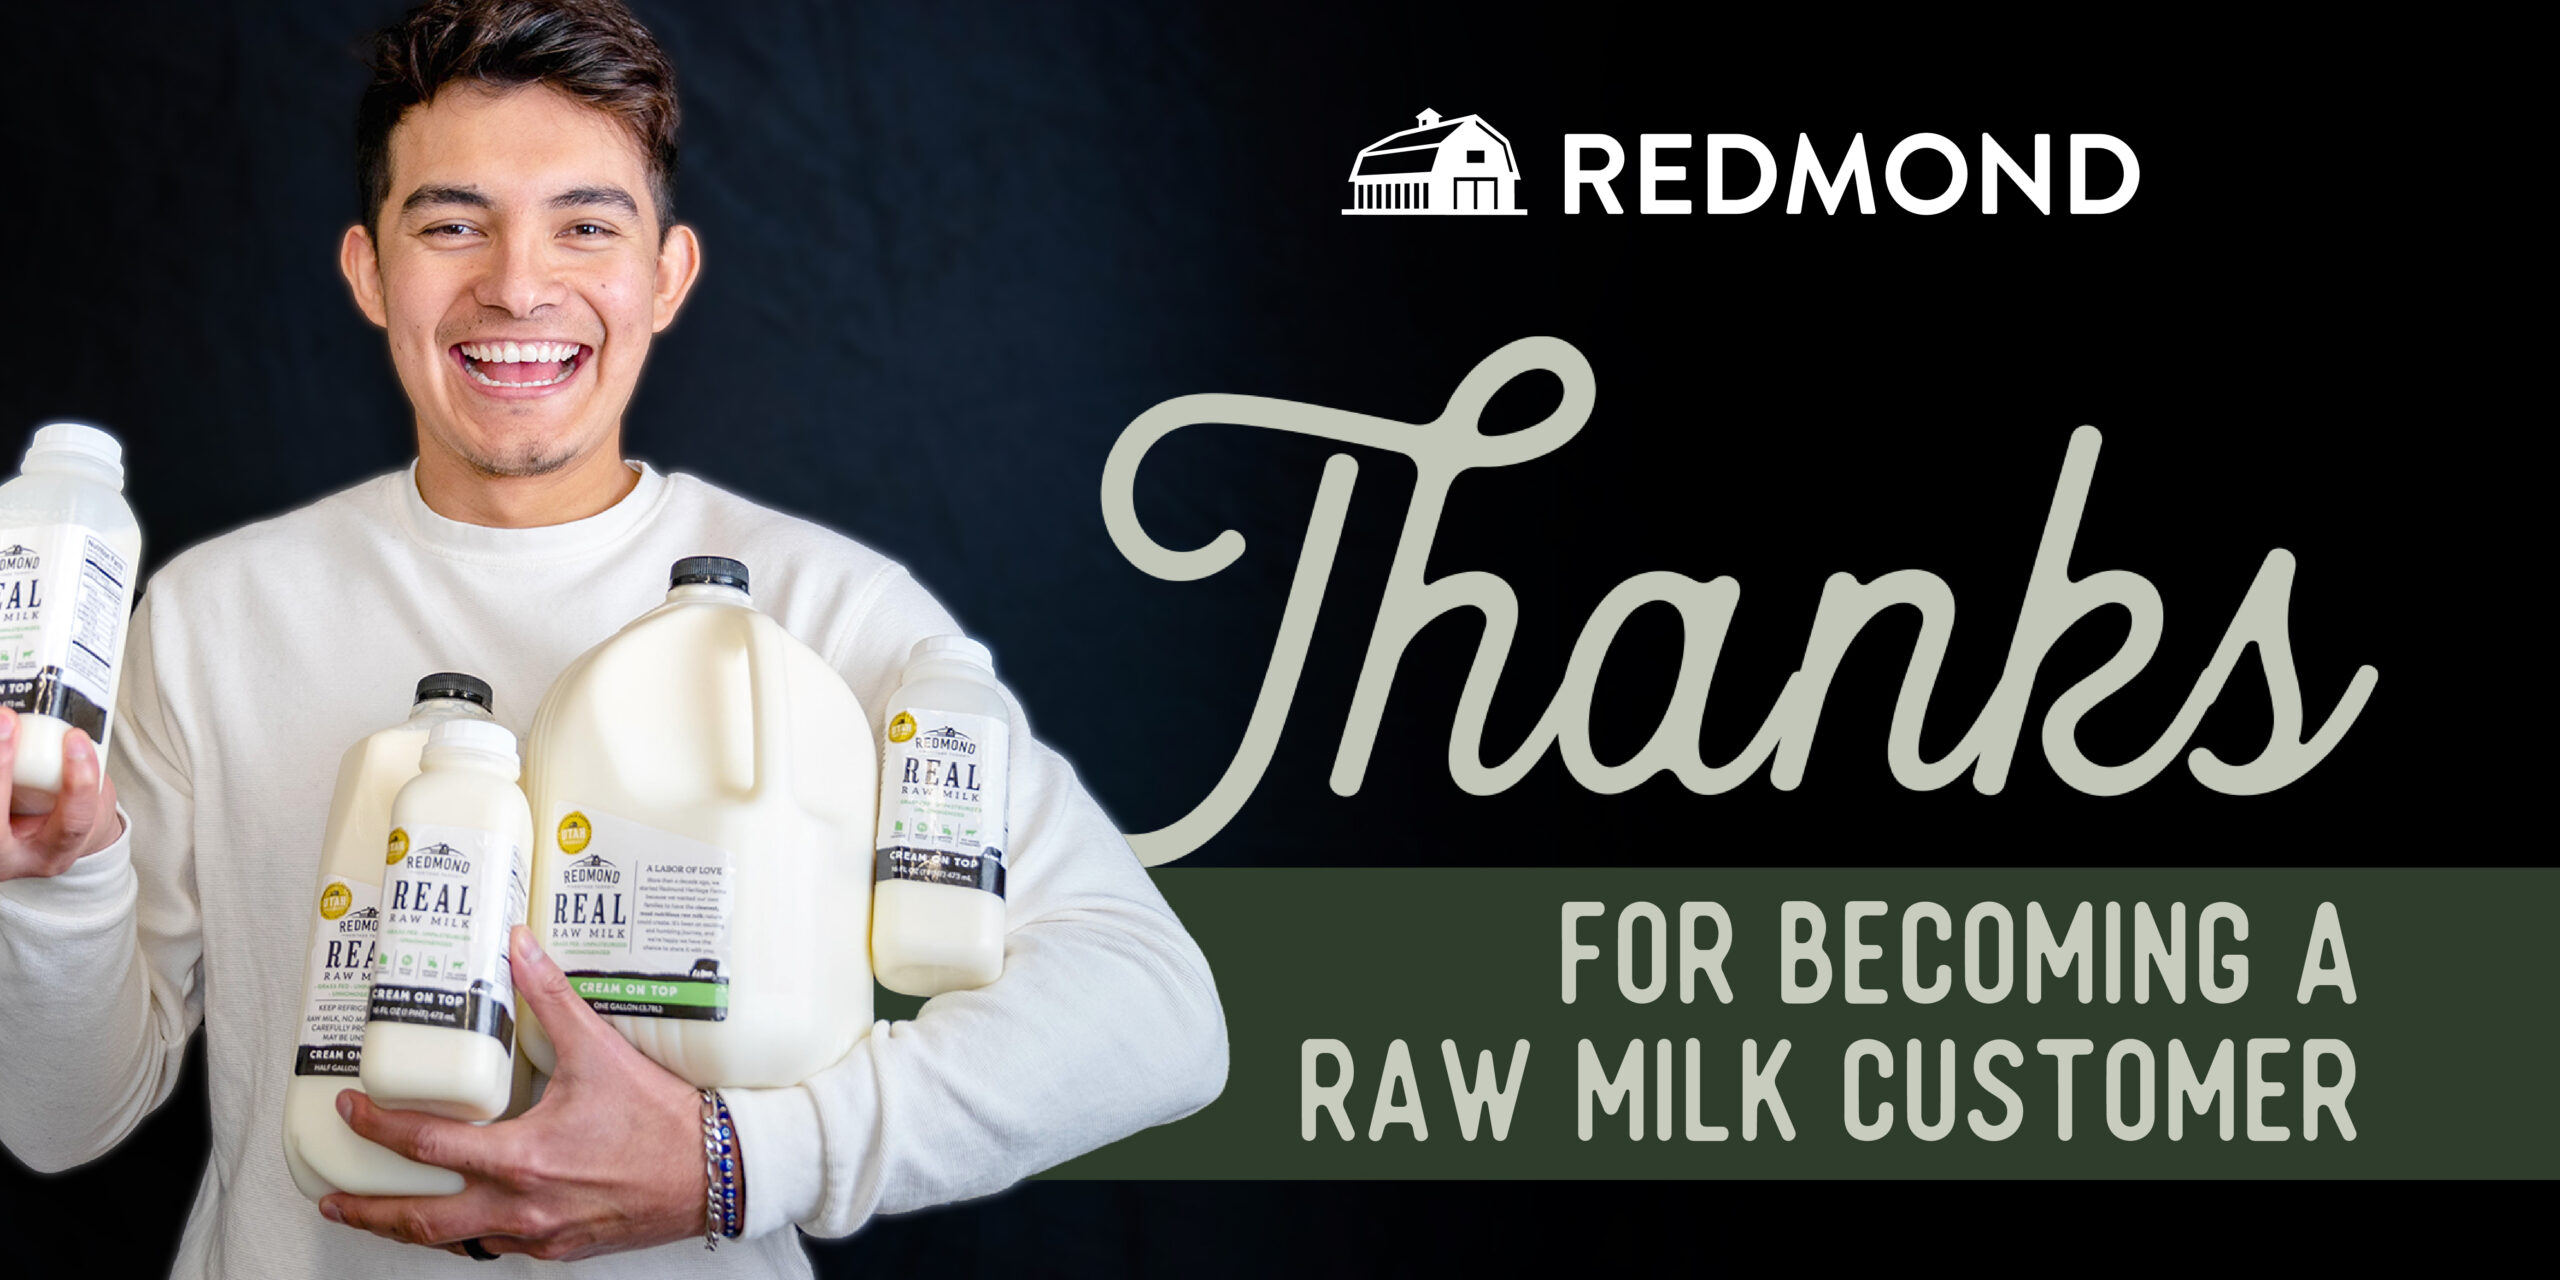 Welcome to the real raw milk family